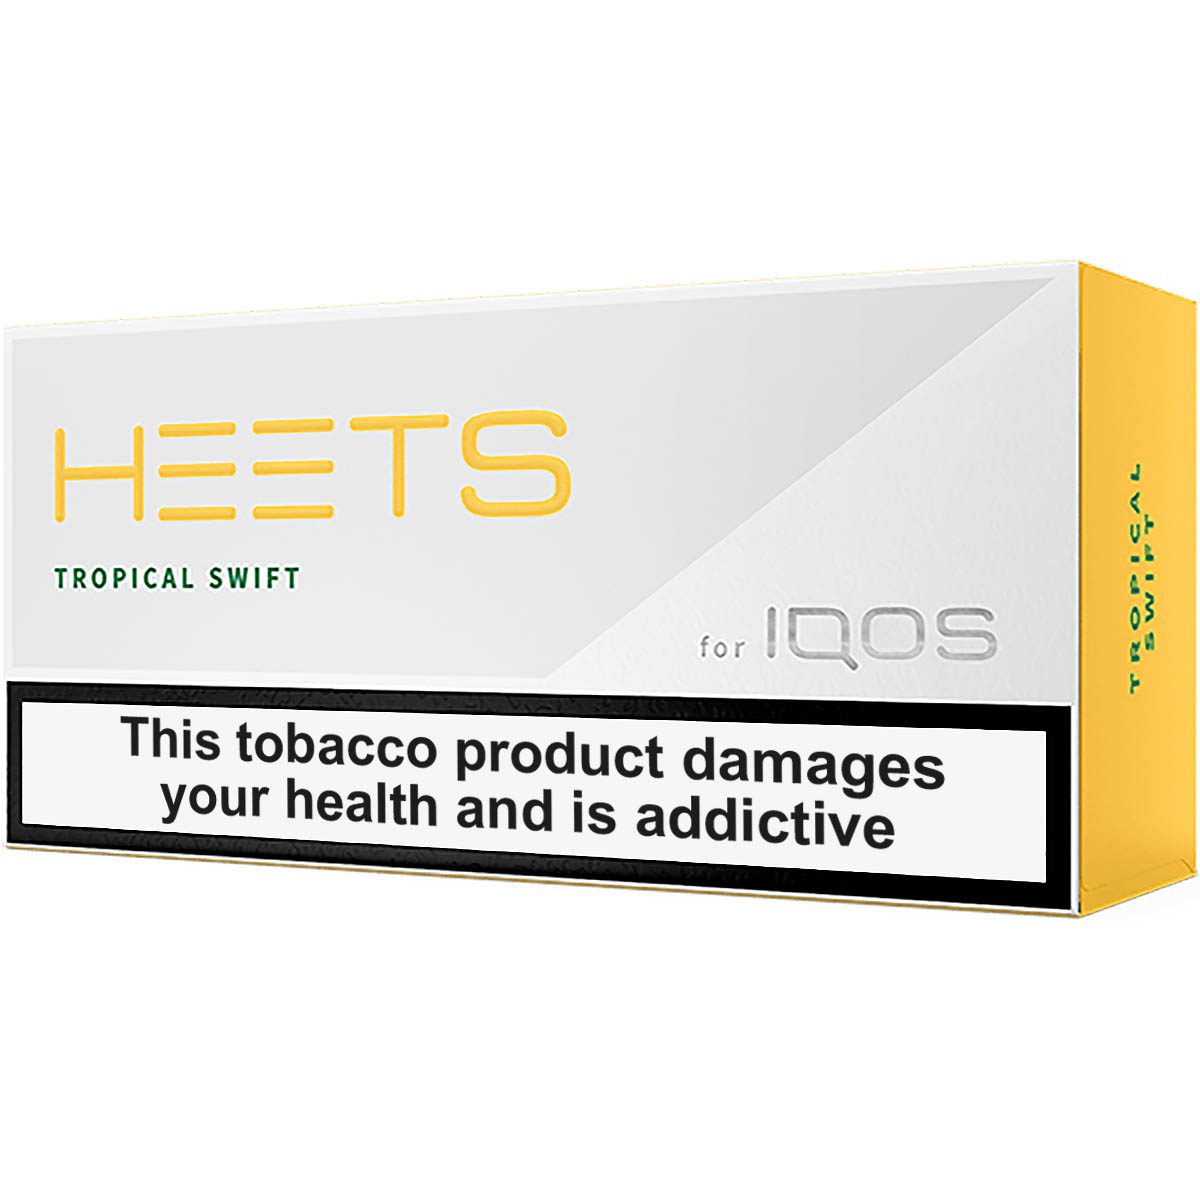 IQOS HEETS TROPICAL SWIFT PARLIAMENT RUSSIA